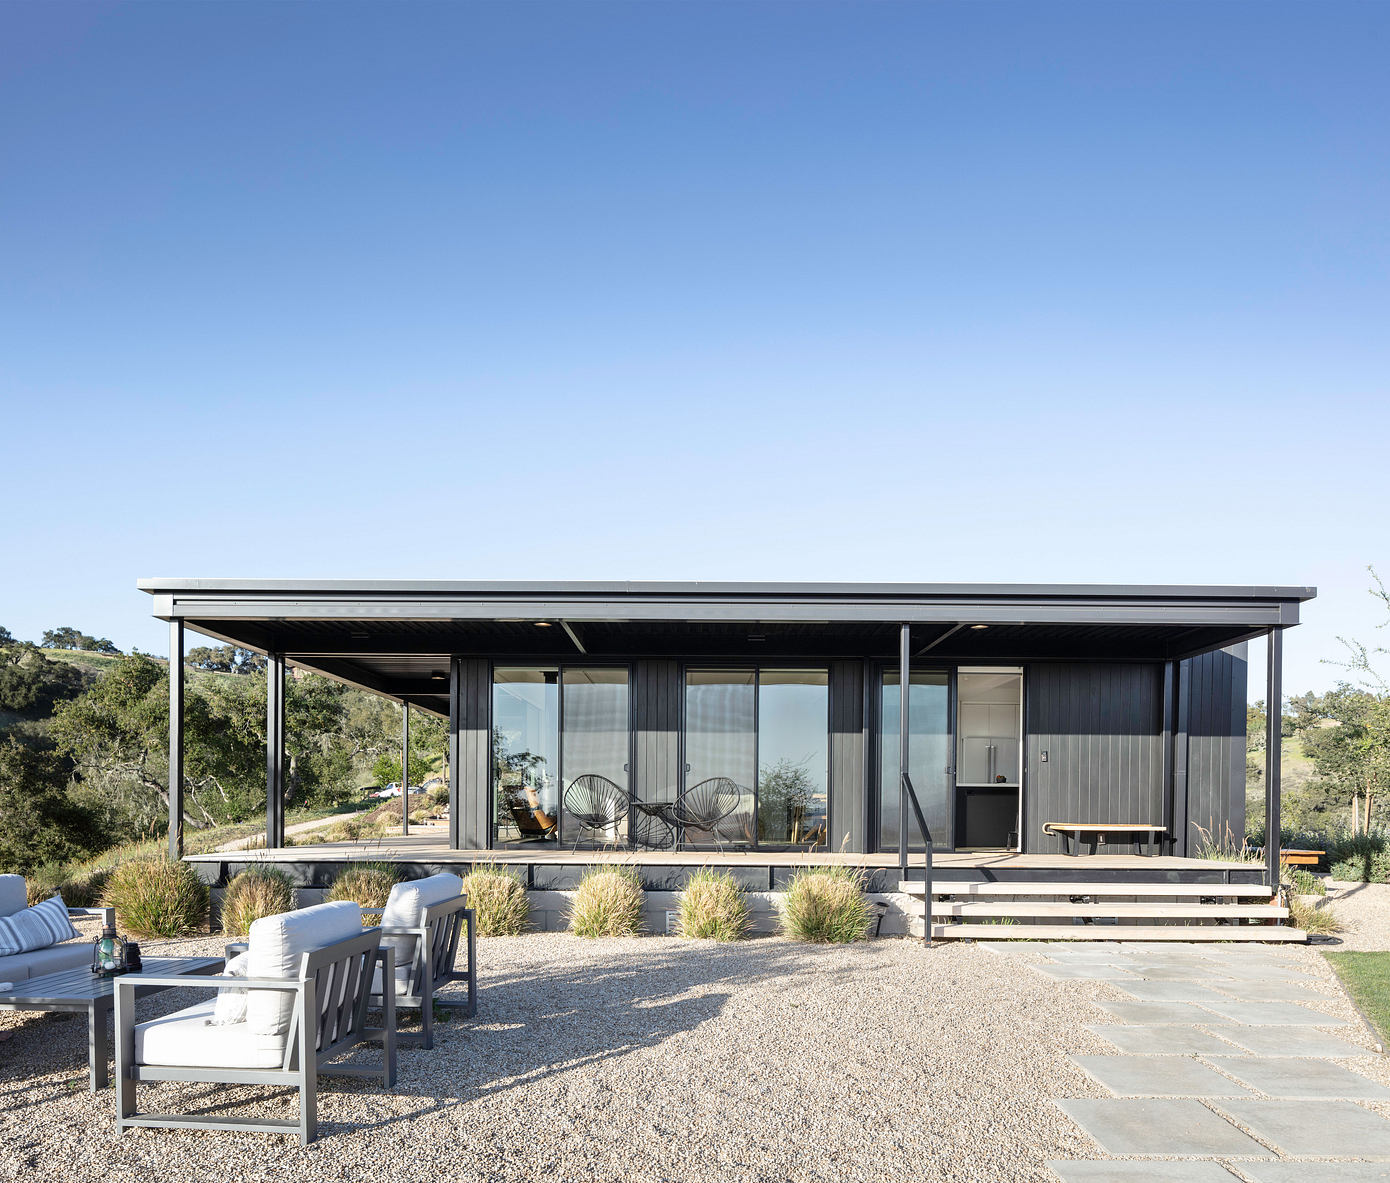 House 018: Sustainable Architecture Meets Stunning Scenery